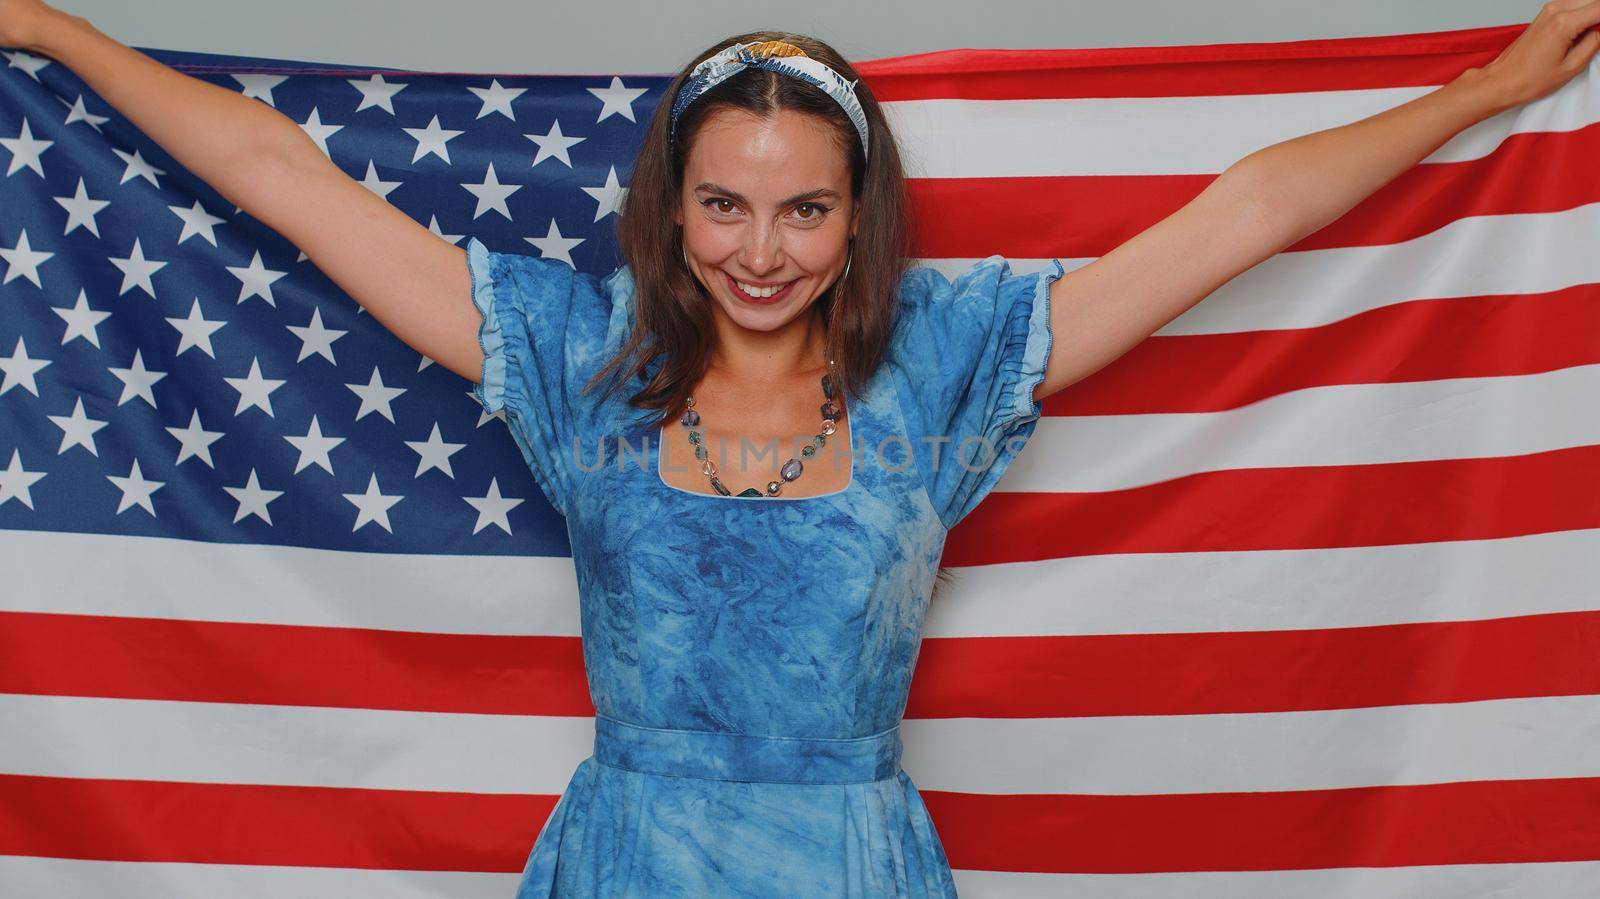 Lovely young woman waving and wrapping in American USA flag, celebrating, human rights and freedoms by efuror